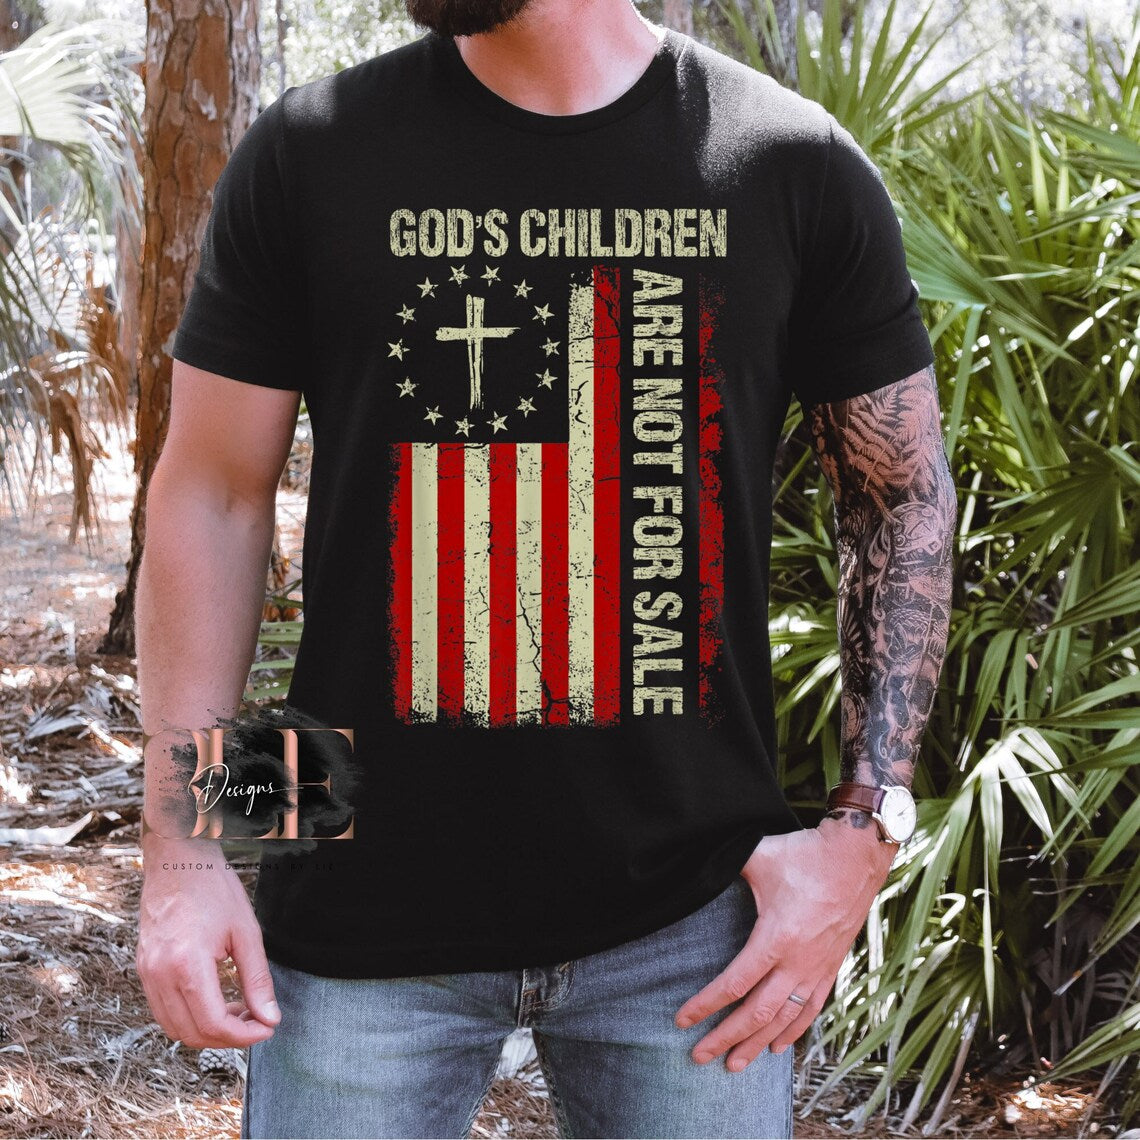 God's Children Are Not For Sale Mens Graphic T-shirt, Stop Child Trafficking Shirt, Protect Our Children Shirt, Patriotic Mens Shirt Cross